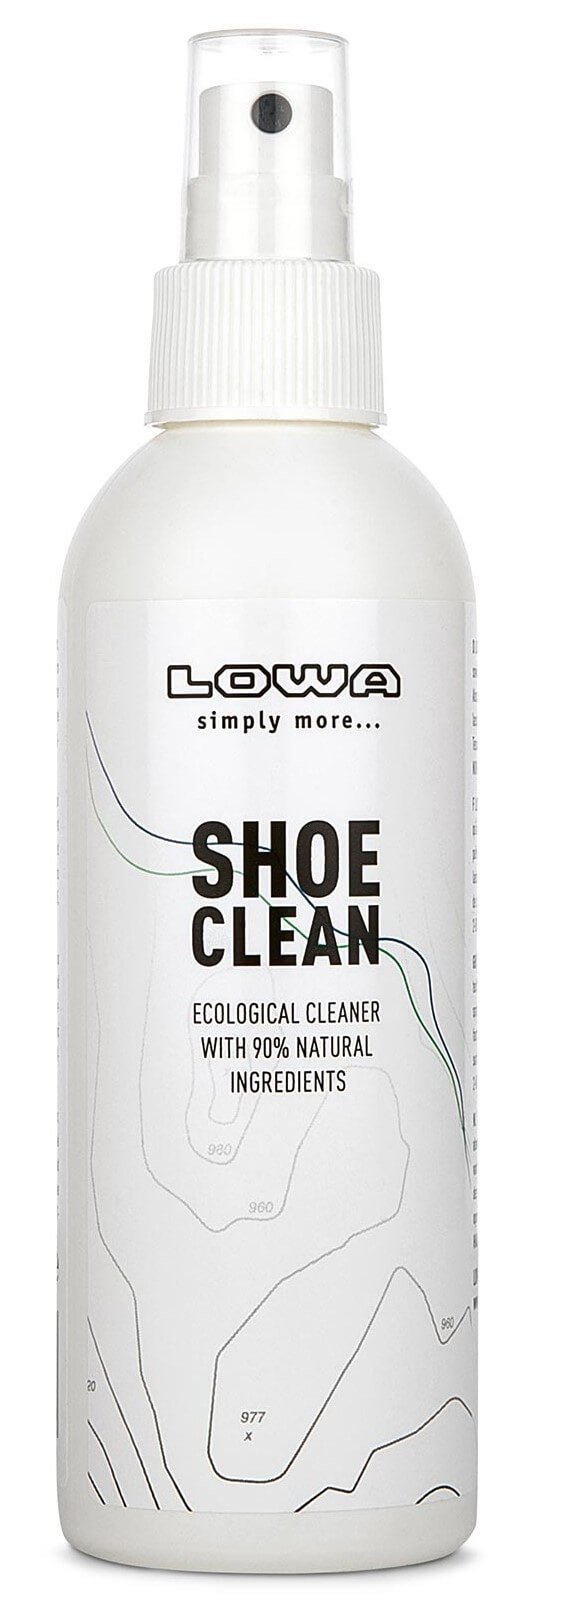 LOWA boot cleaning spray on a white background